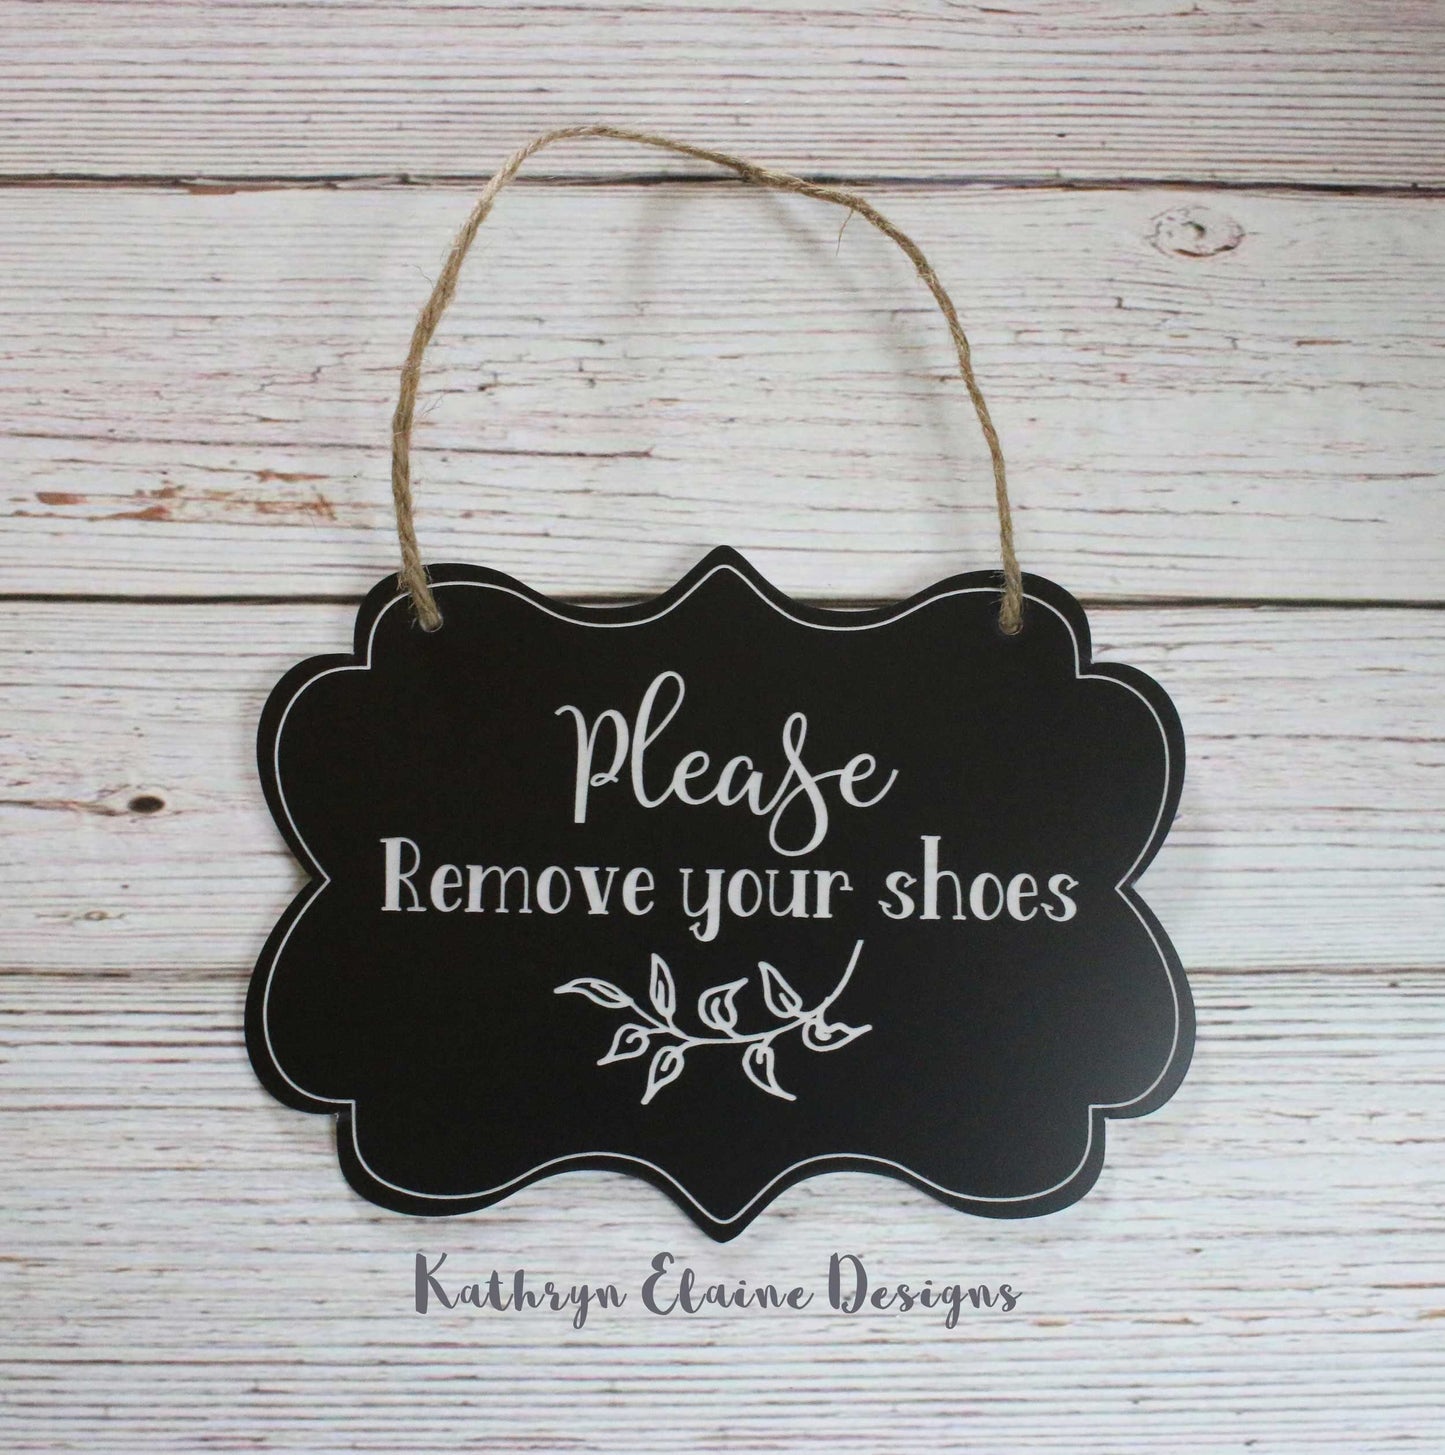 Black laminate scalloped edge sign with white lettering stating Please remove your shoes with leaf design and border on white wood background